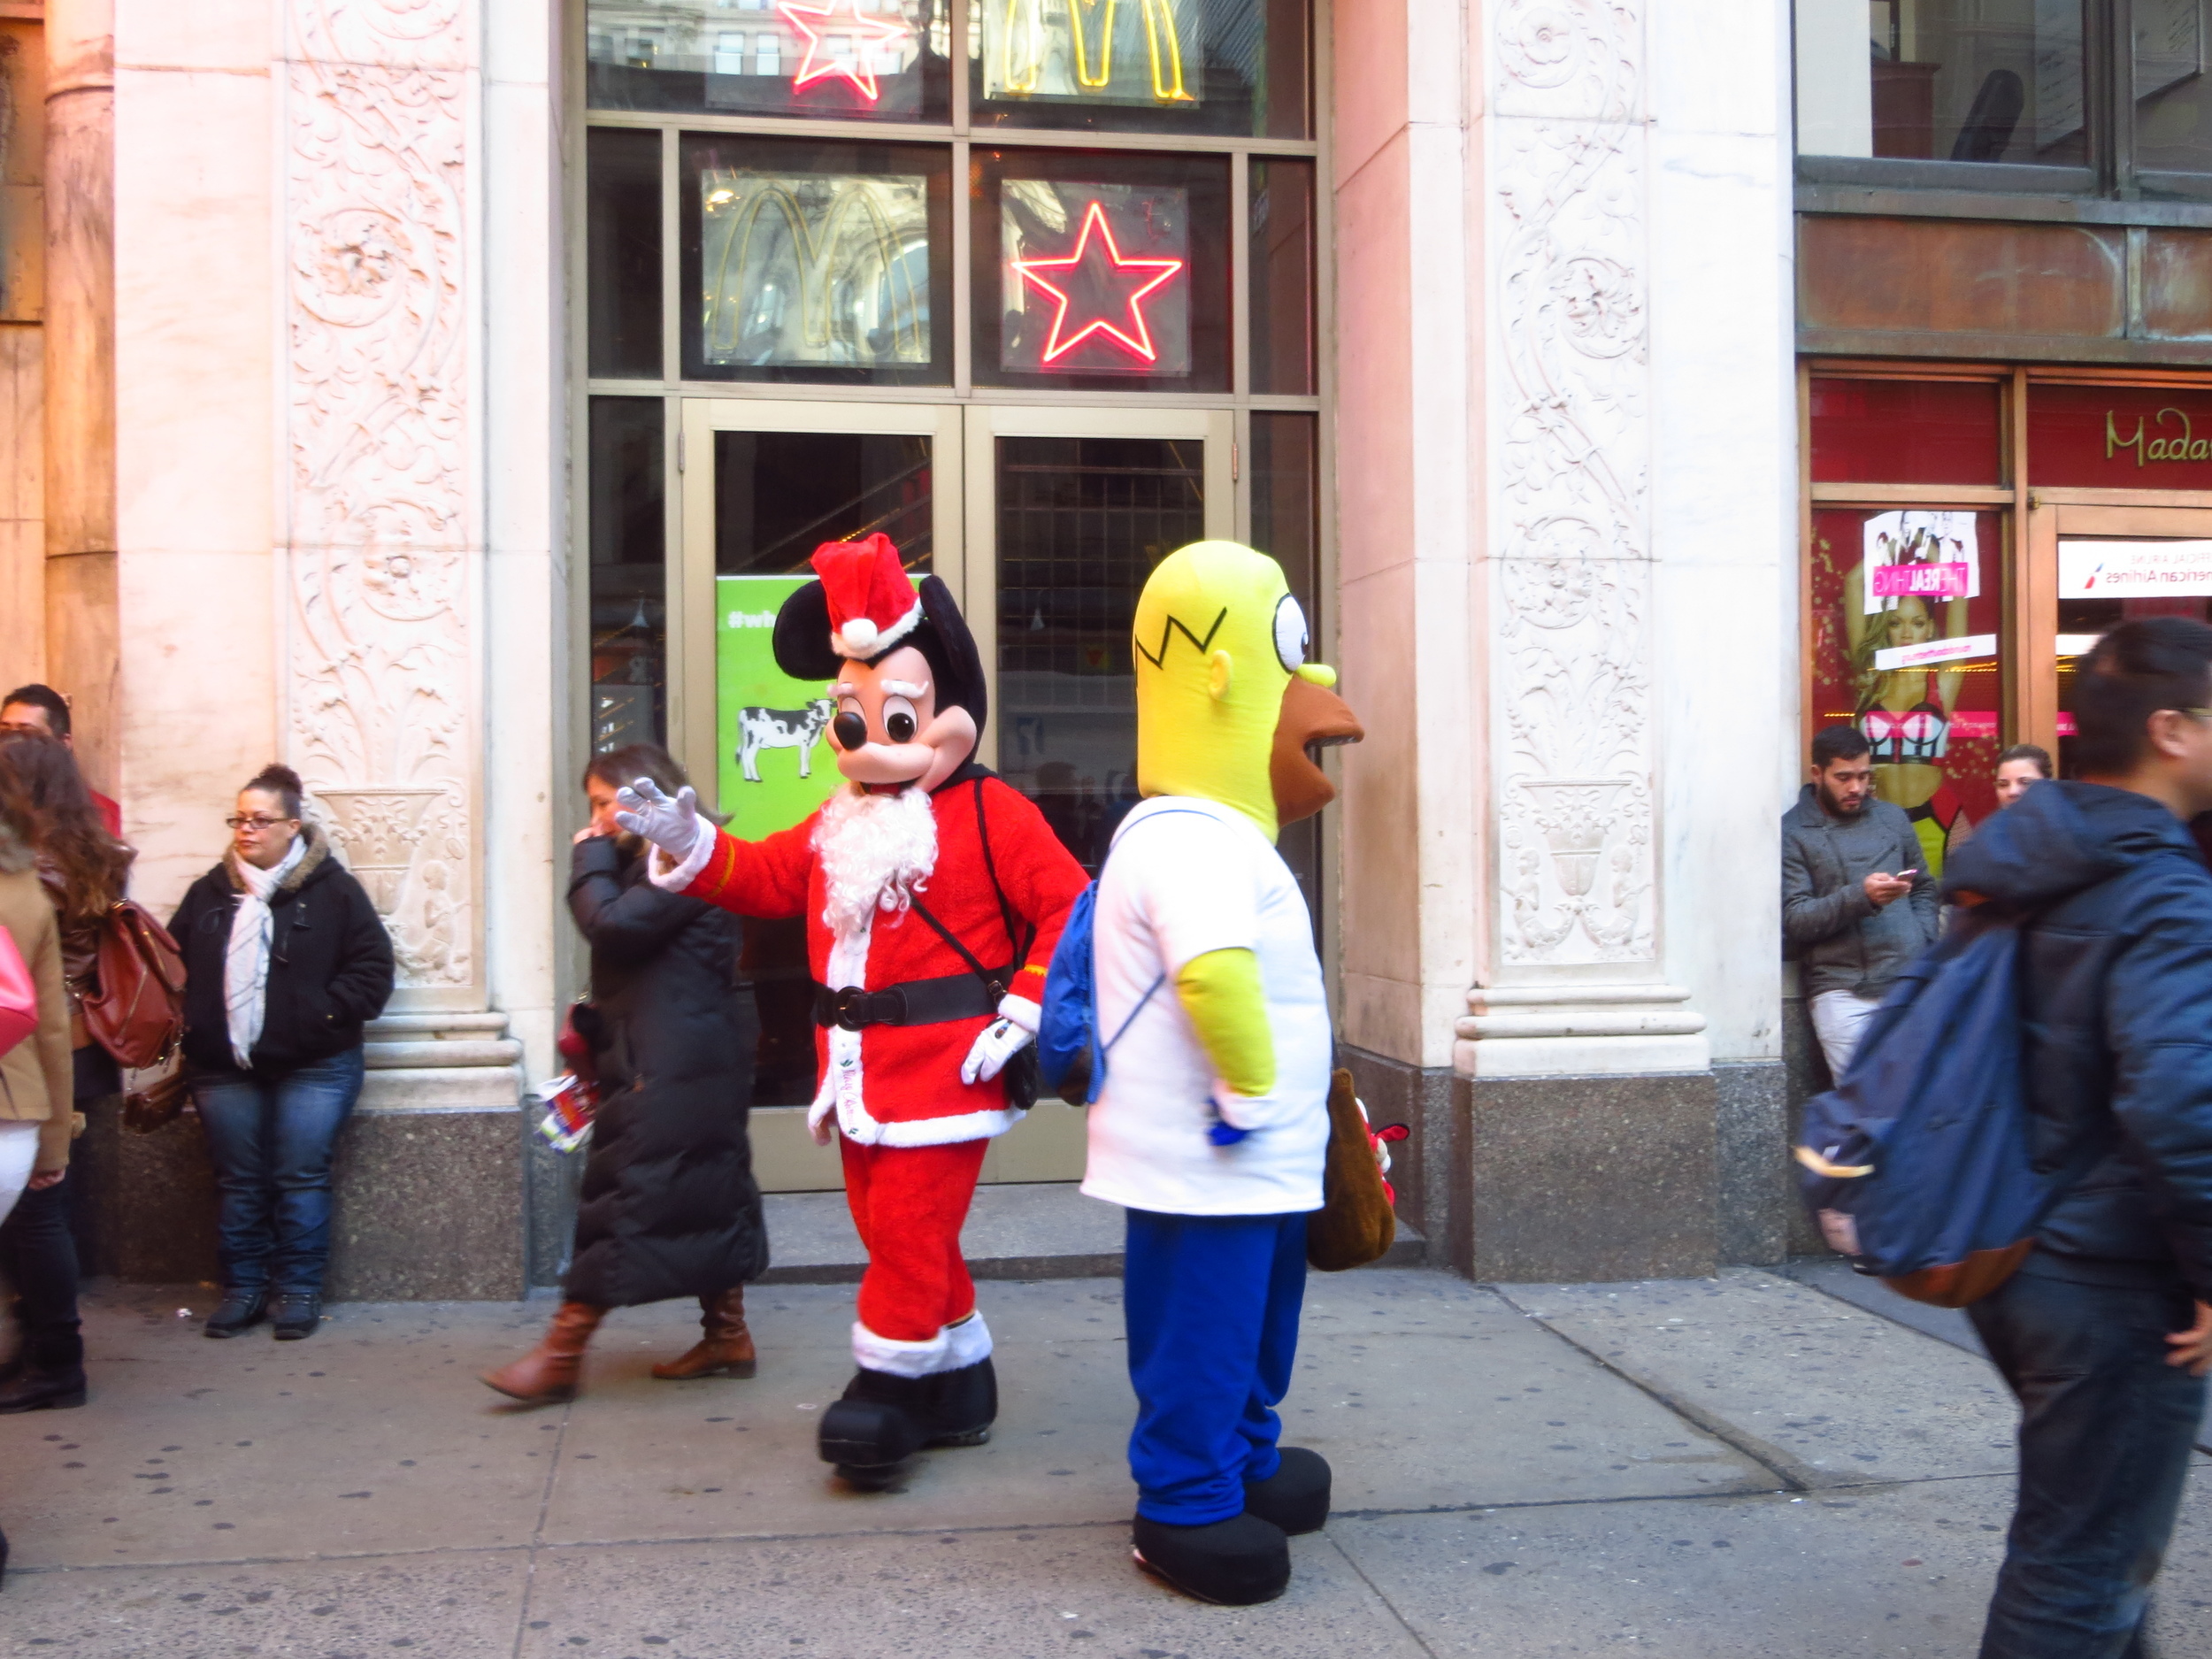 Poorly made, unlicensed costumed characters - WOO TIMES SQUARE!